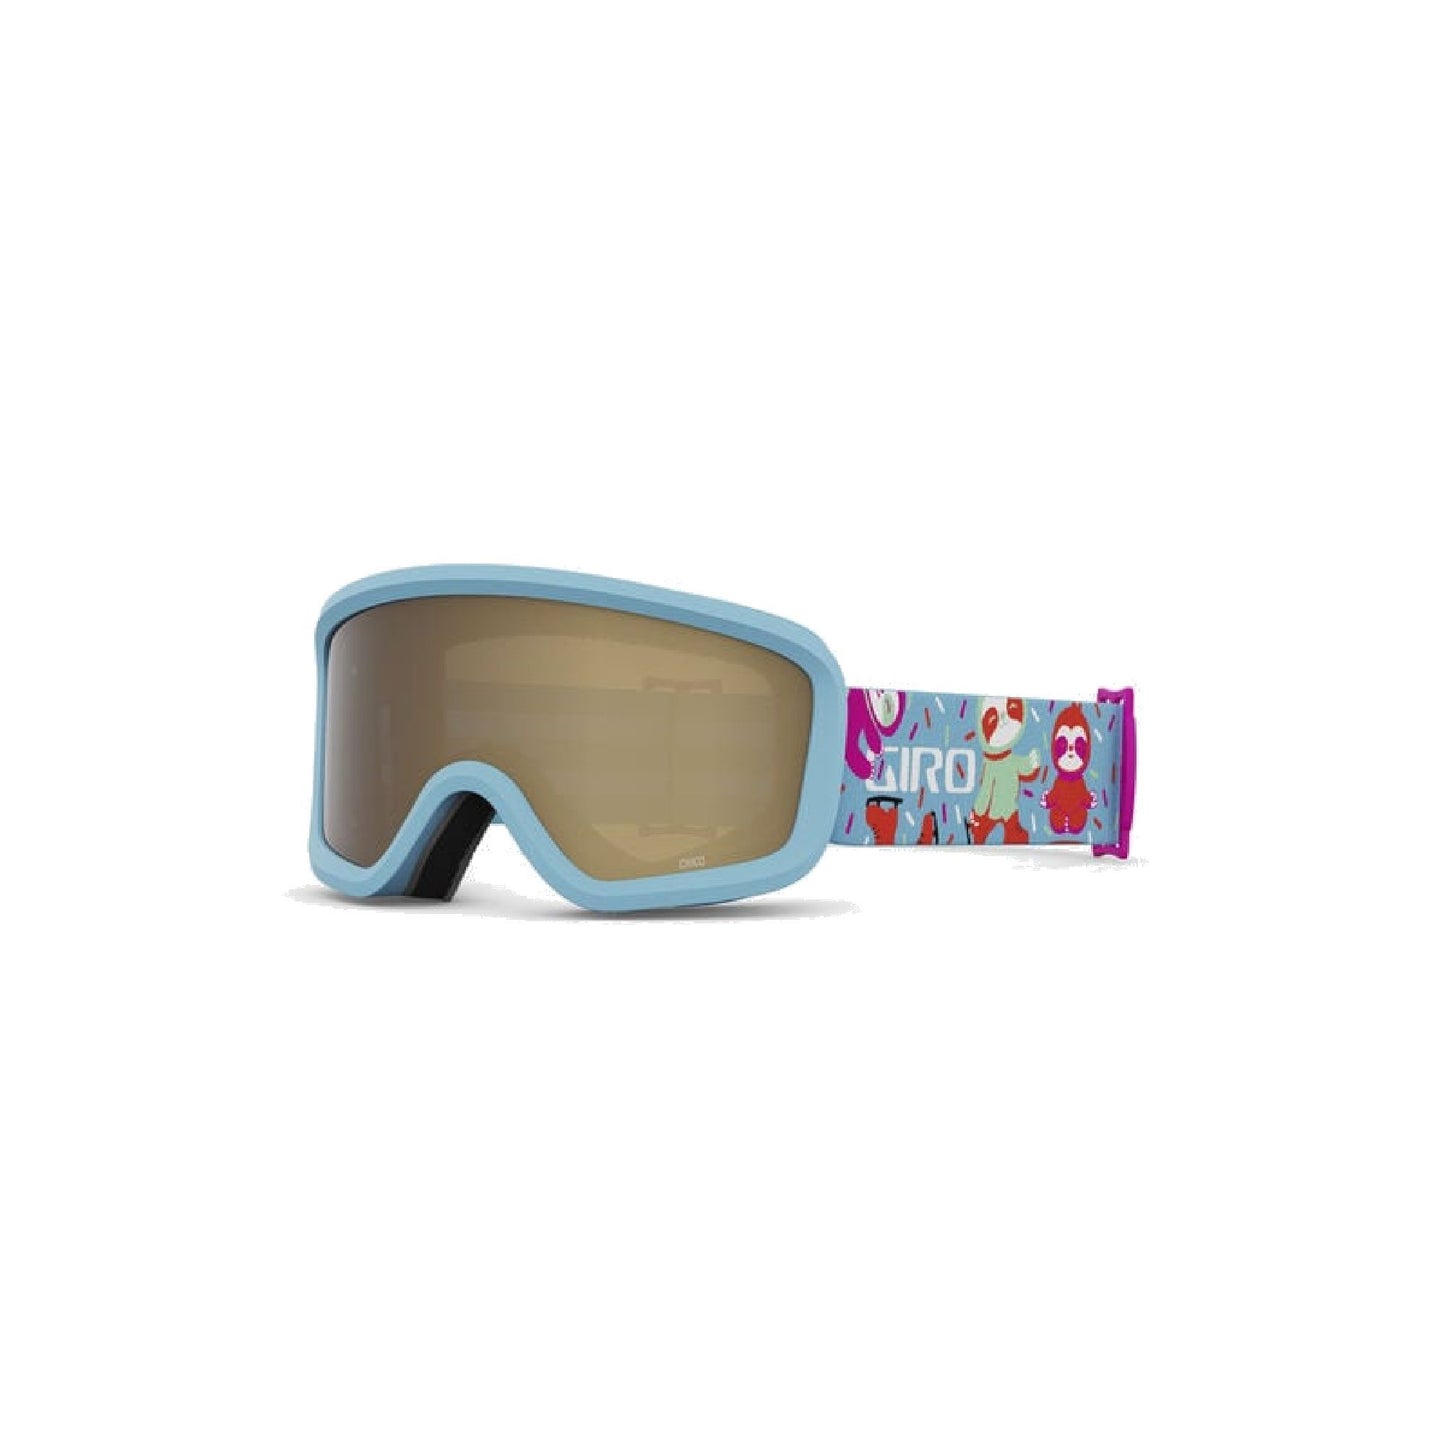 Giro Youth Chico 2.0 Snow Goggles Light Harbor Blue Phil / Amber Rose Snow Goggles